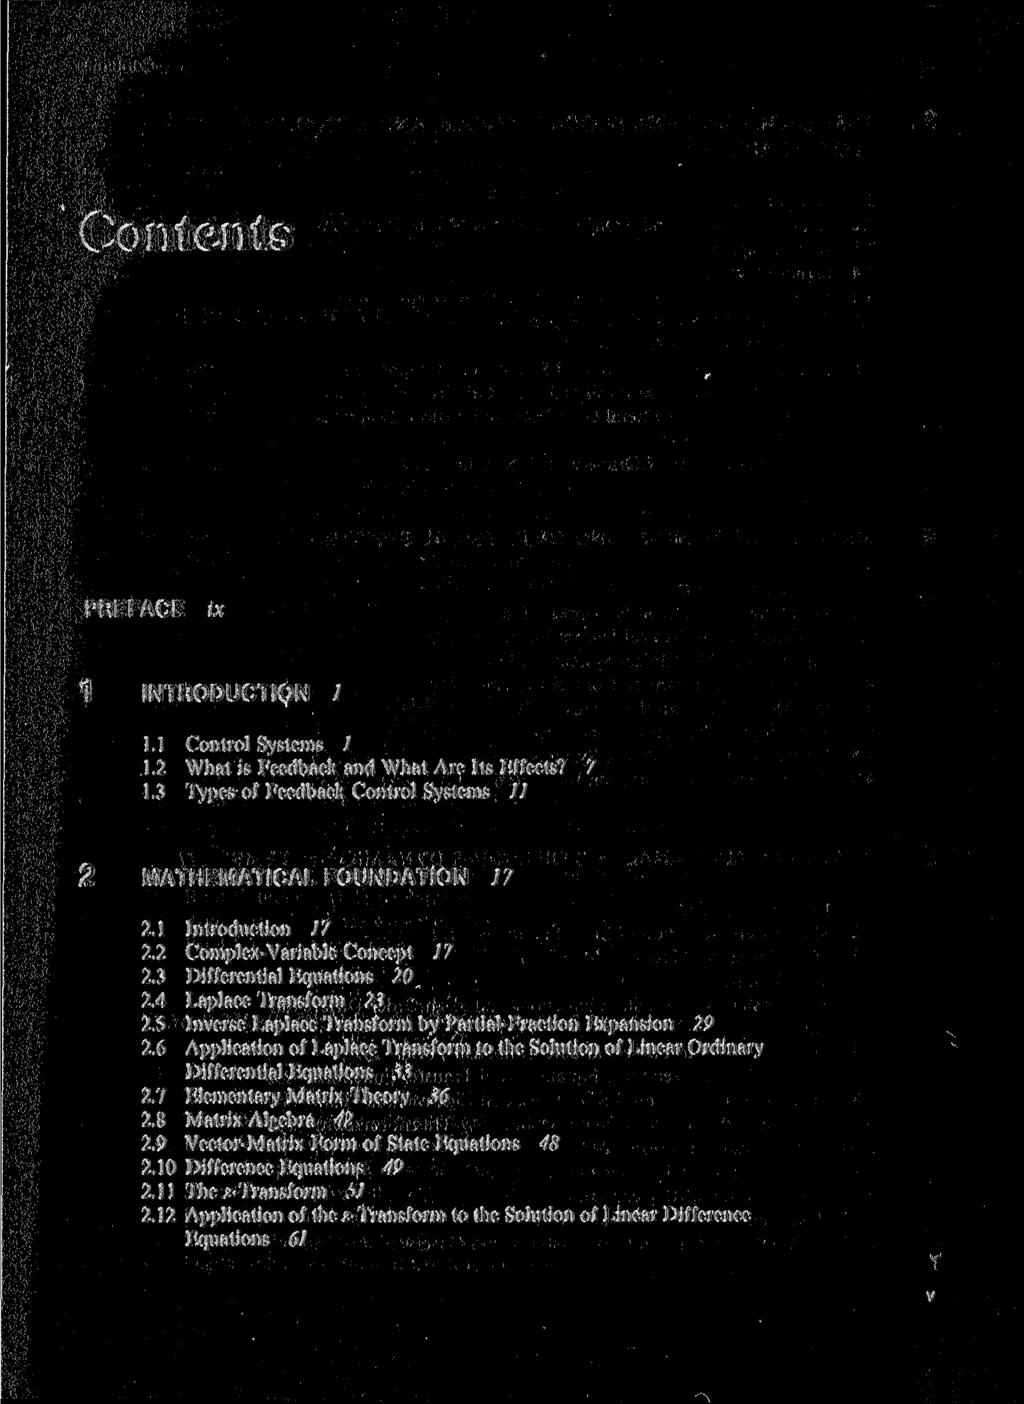 Contents PREFACE ix 1 INTRODUCTION 1 1.1 Control Systems 1 1.2 What is Feedback and What Arc Its Effects? 7 1.3 Types of Feedback Control Systems // 2 MATHEMATICAL FOUNDATION 17 2.